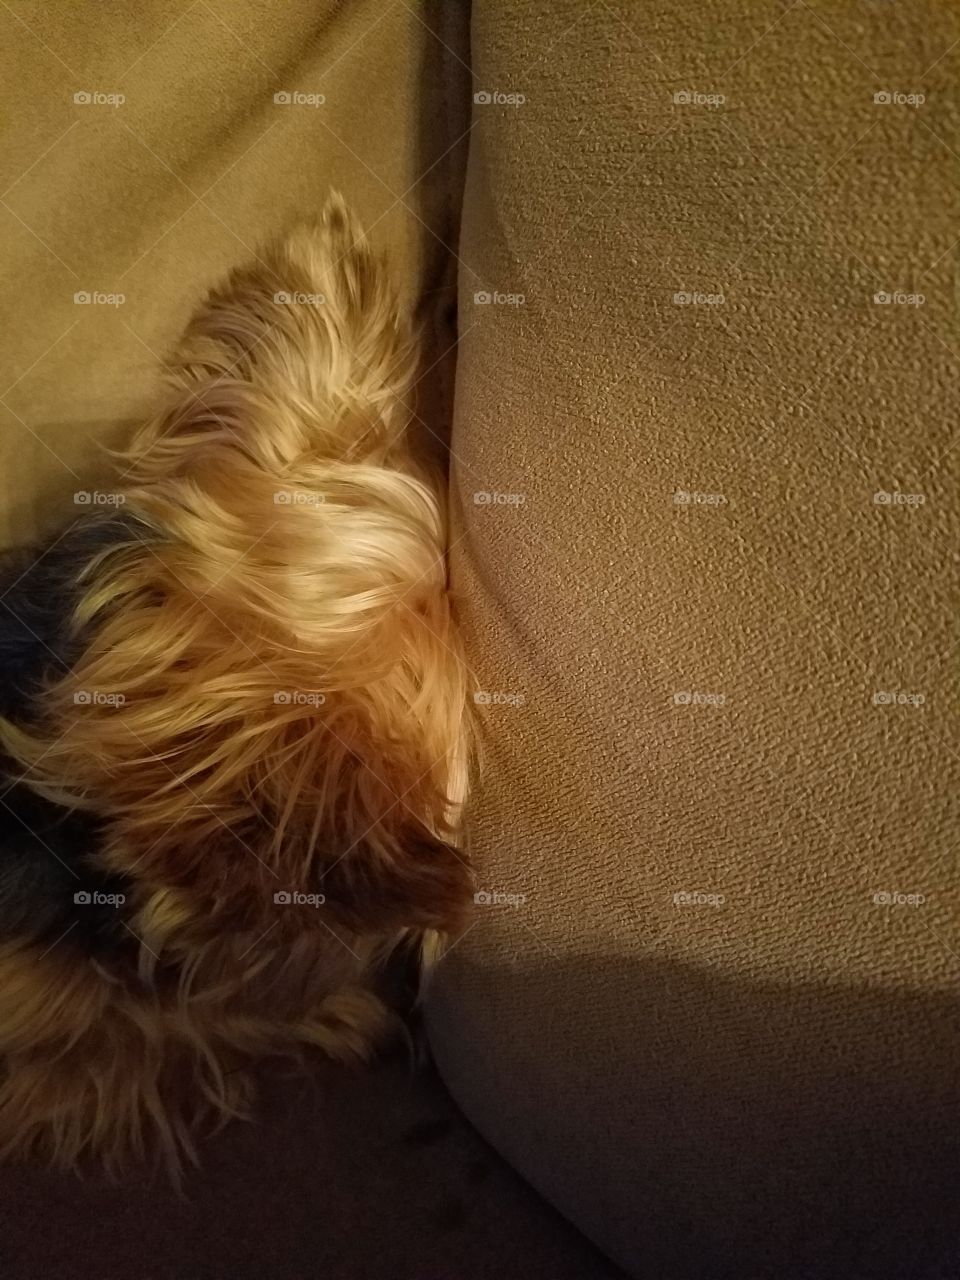 yorkie politely covering his cough